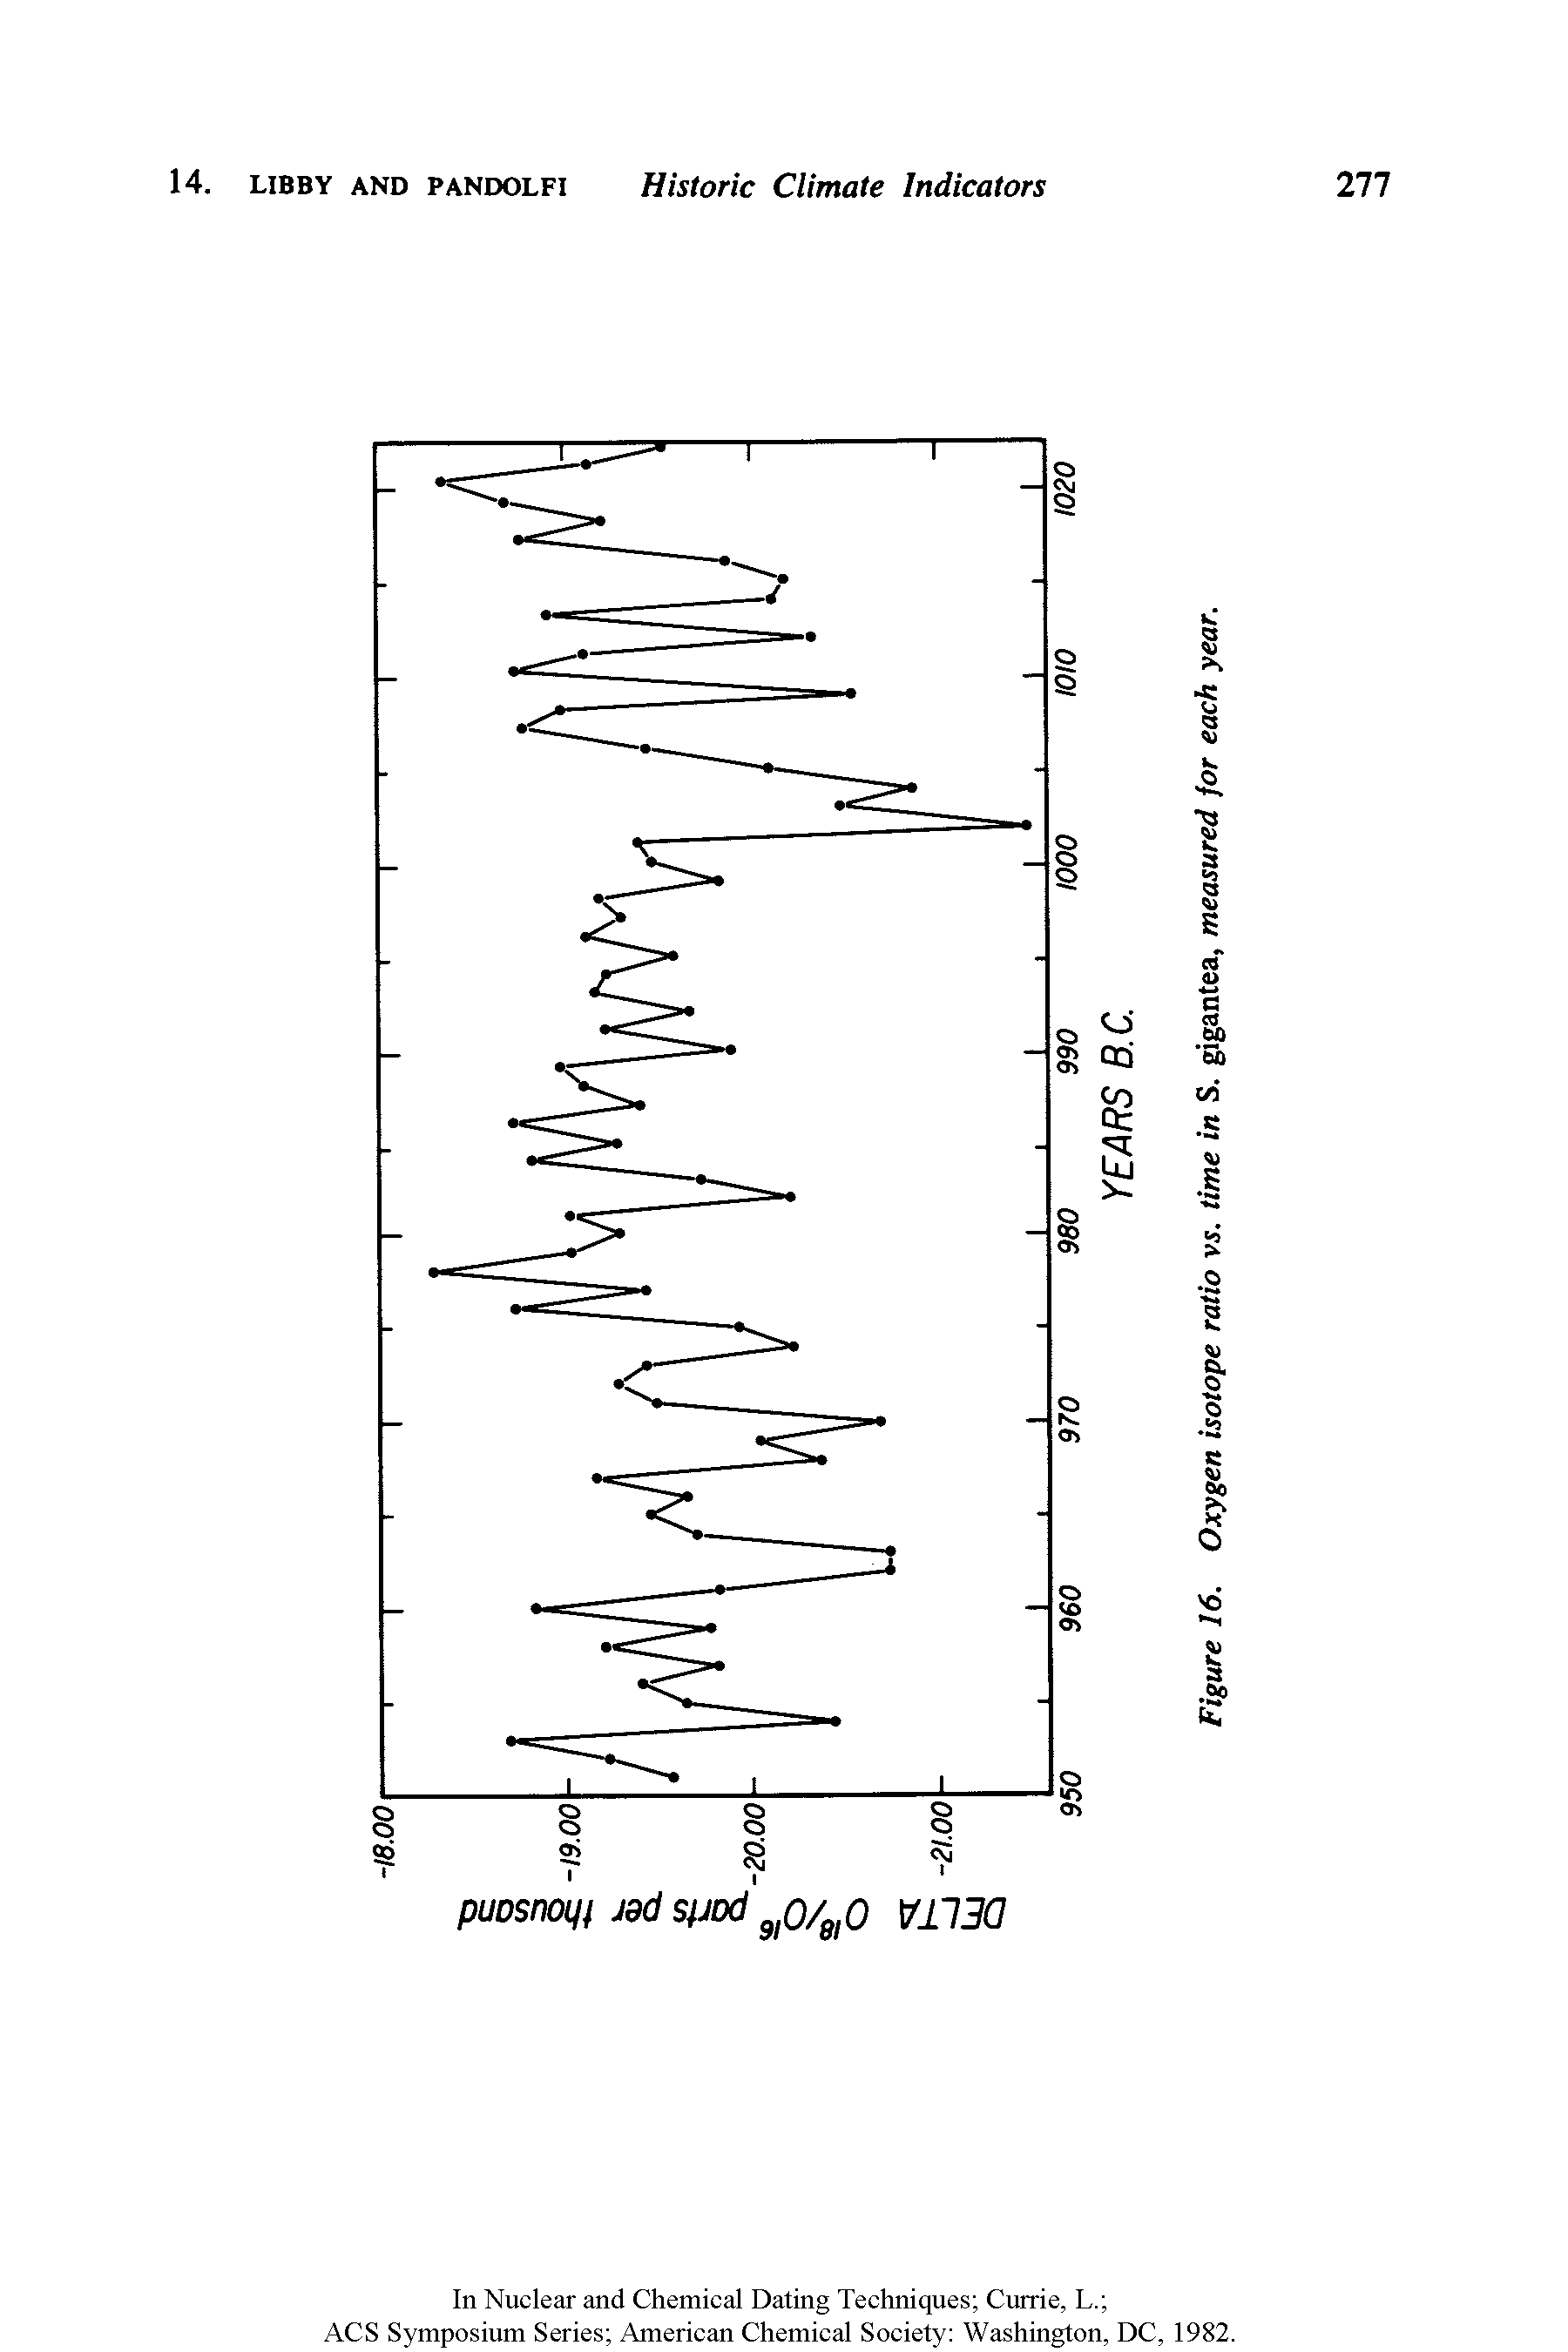 Figure 16. Oxygen isotope ratio vs. time in S. gigantea, measured for each year.